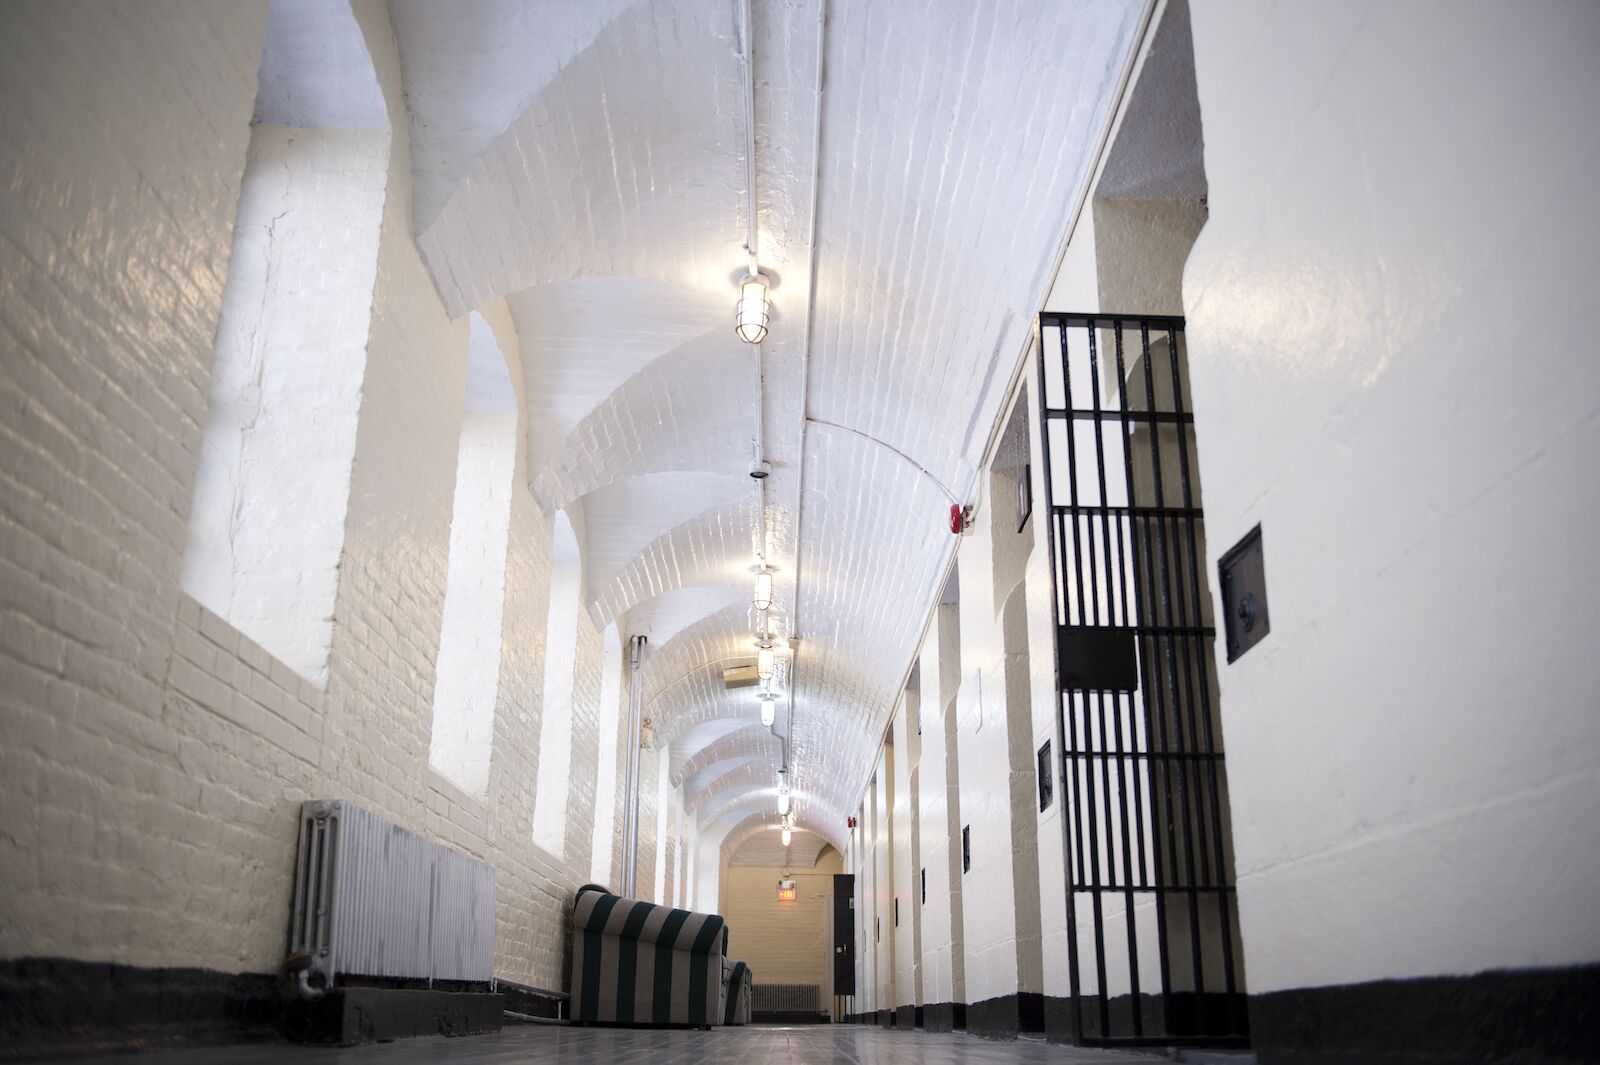 Inside of the jail hostel in Ottawa. One of many repurposed buildings turned into hostels.